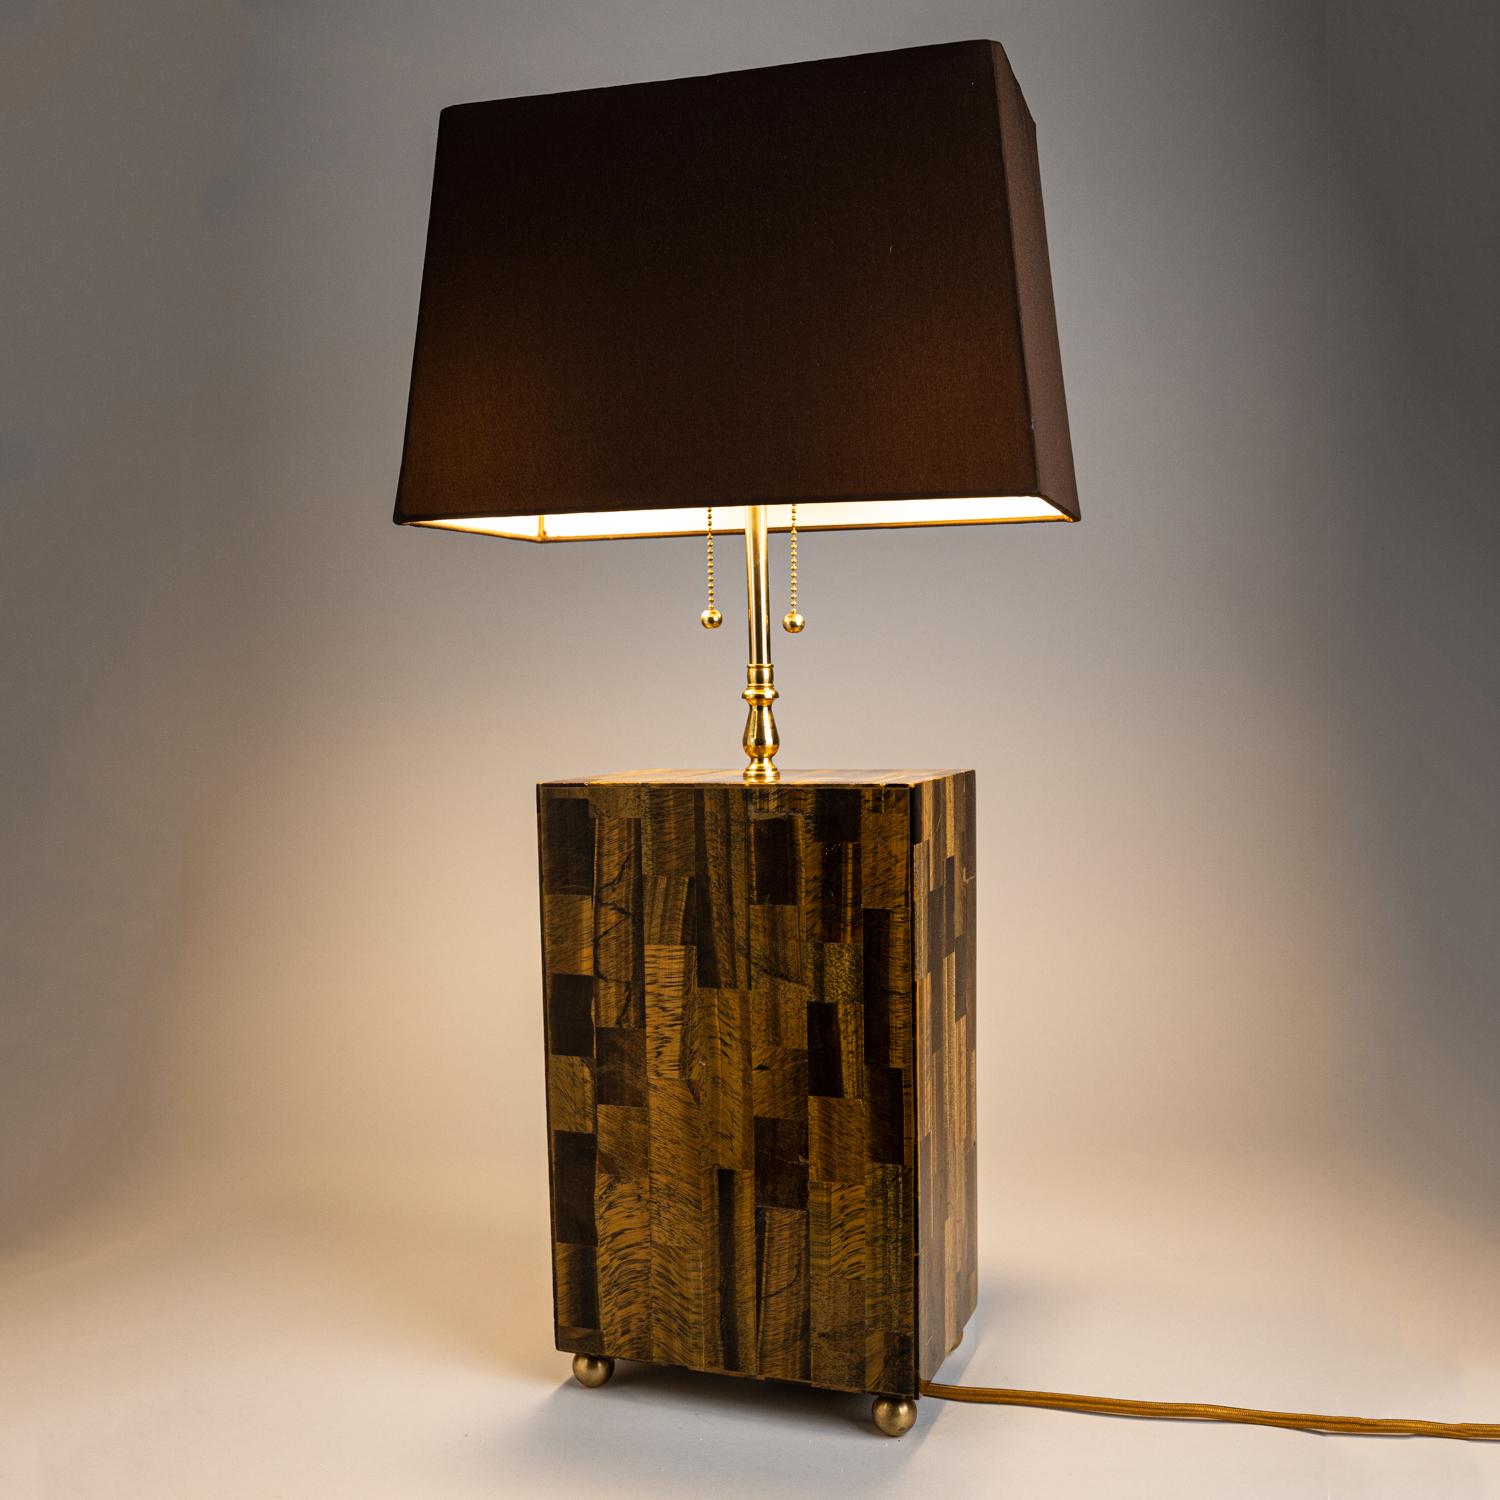 Genuine and Beautiful Mosaic Tiger's Eye Floor Lamp from India
Crafted exclusively in golden tiger's eye, this rectangular lamp makes a beautiful display with its high quality craftmanship. The dark brown fabric lampshade is included in this piece.